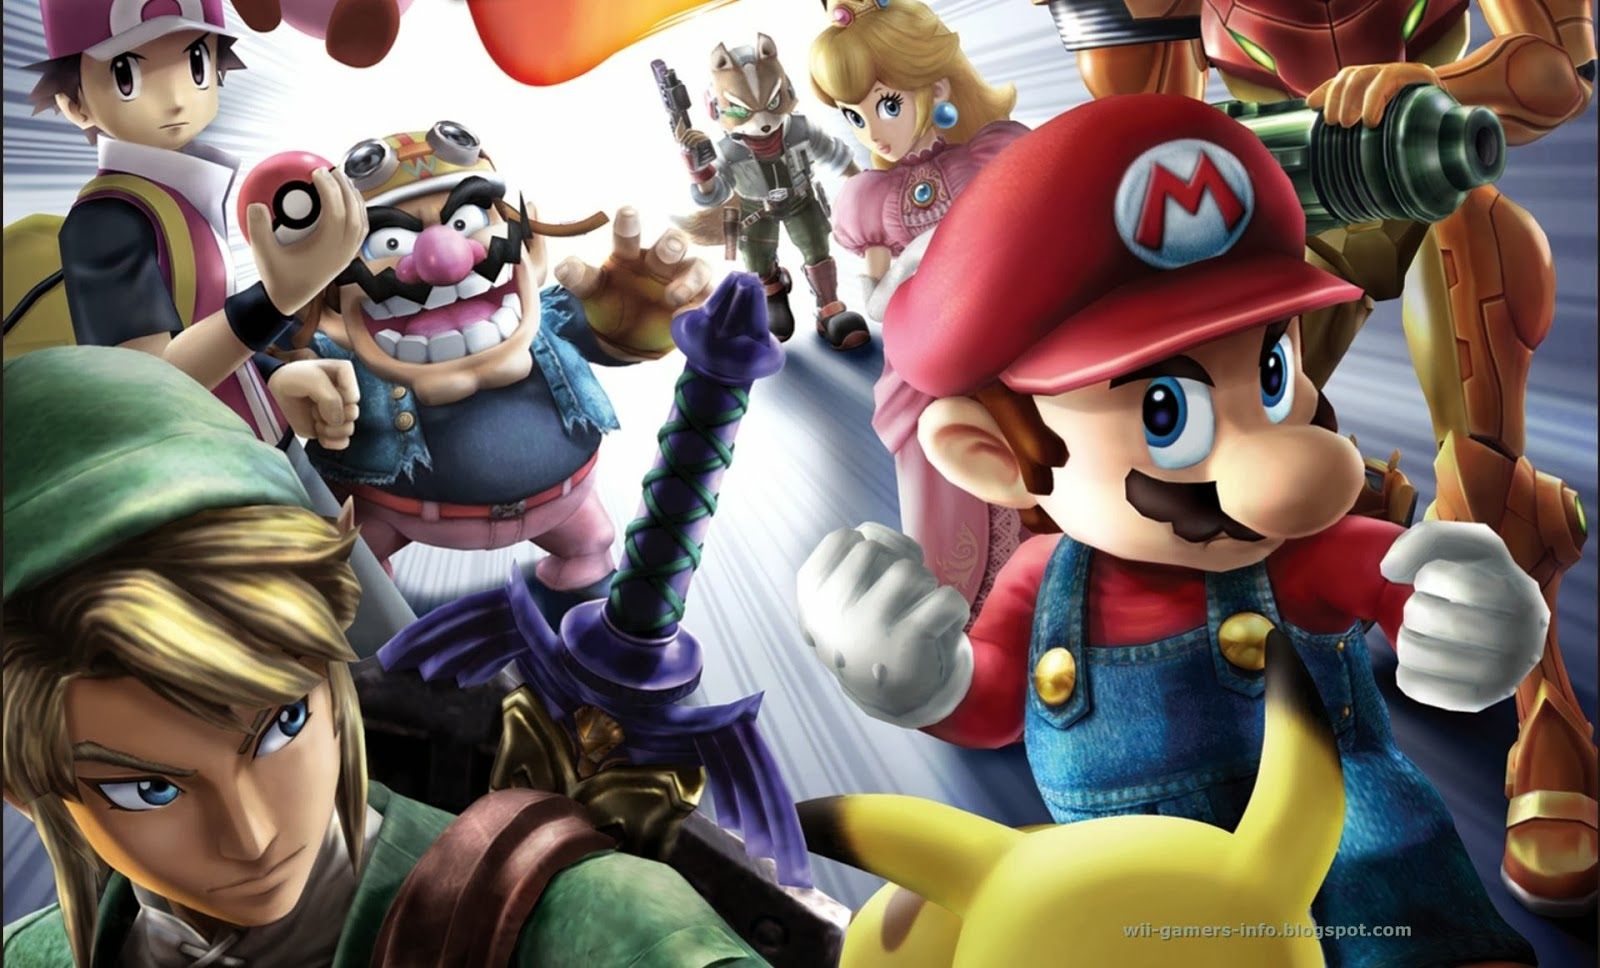 Mario Characters Wallpaper Free Mario Characters Background